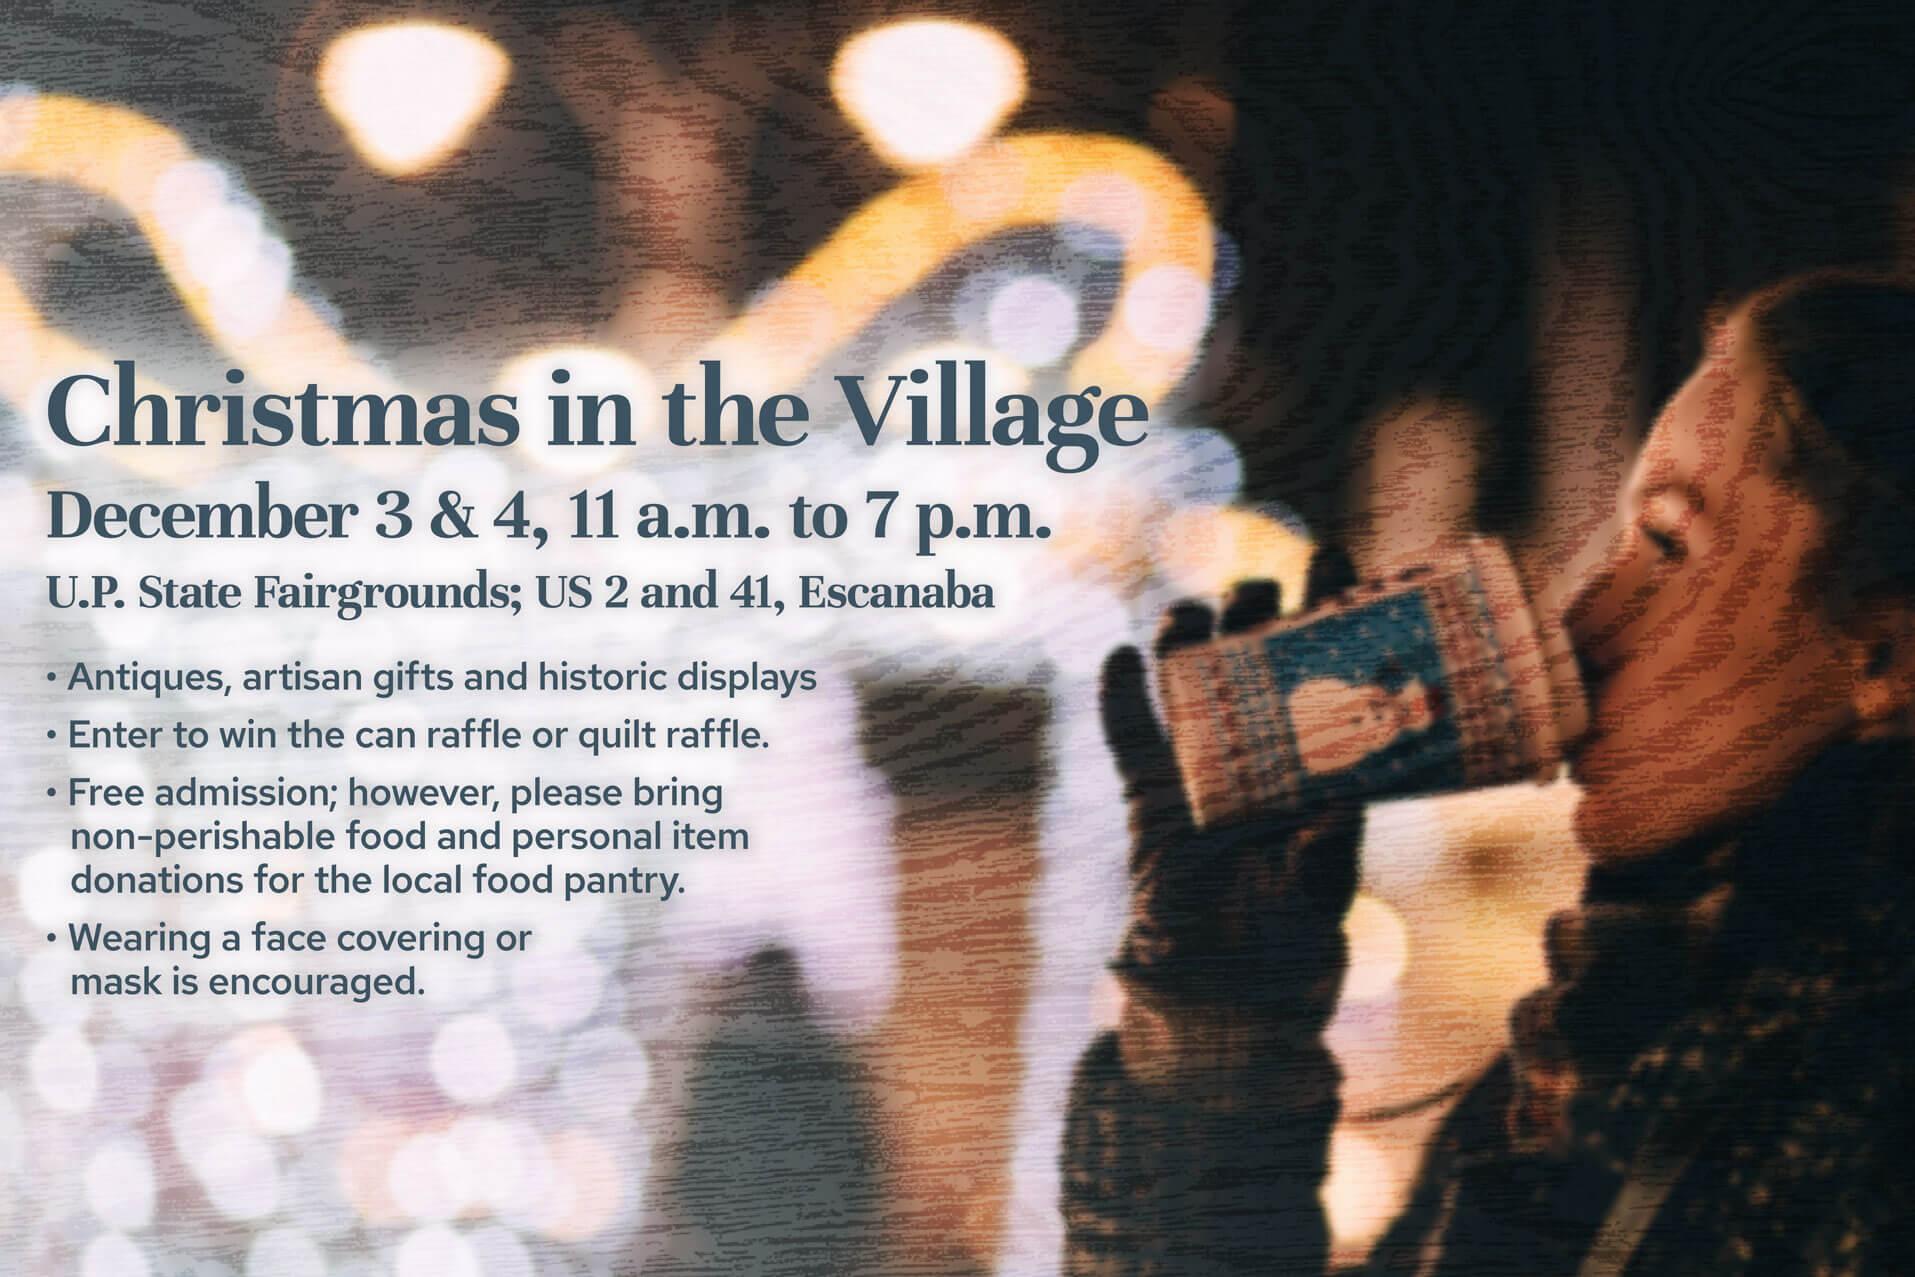 an image showing Christmas in the Village in Escanaba is on December 3rd and 4th from 11 am to 7 pm